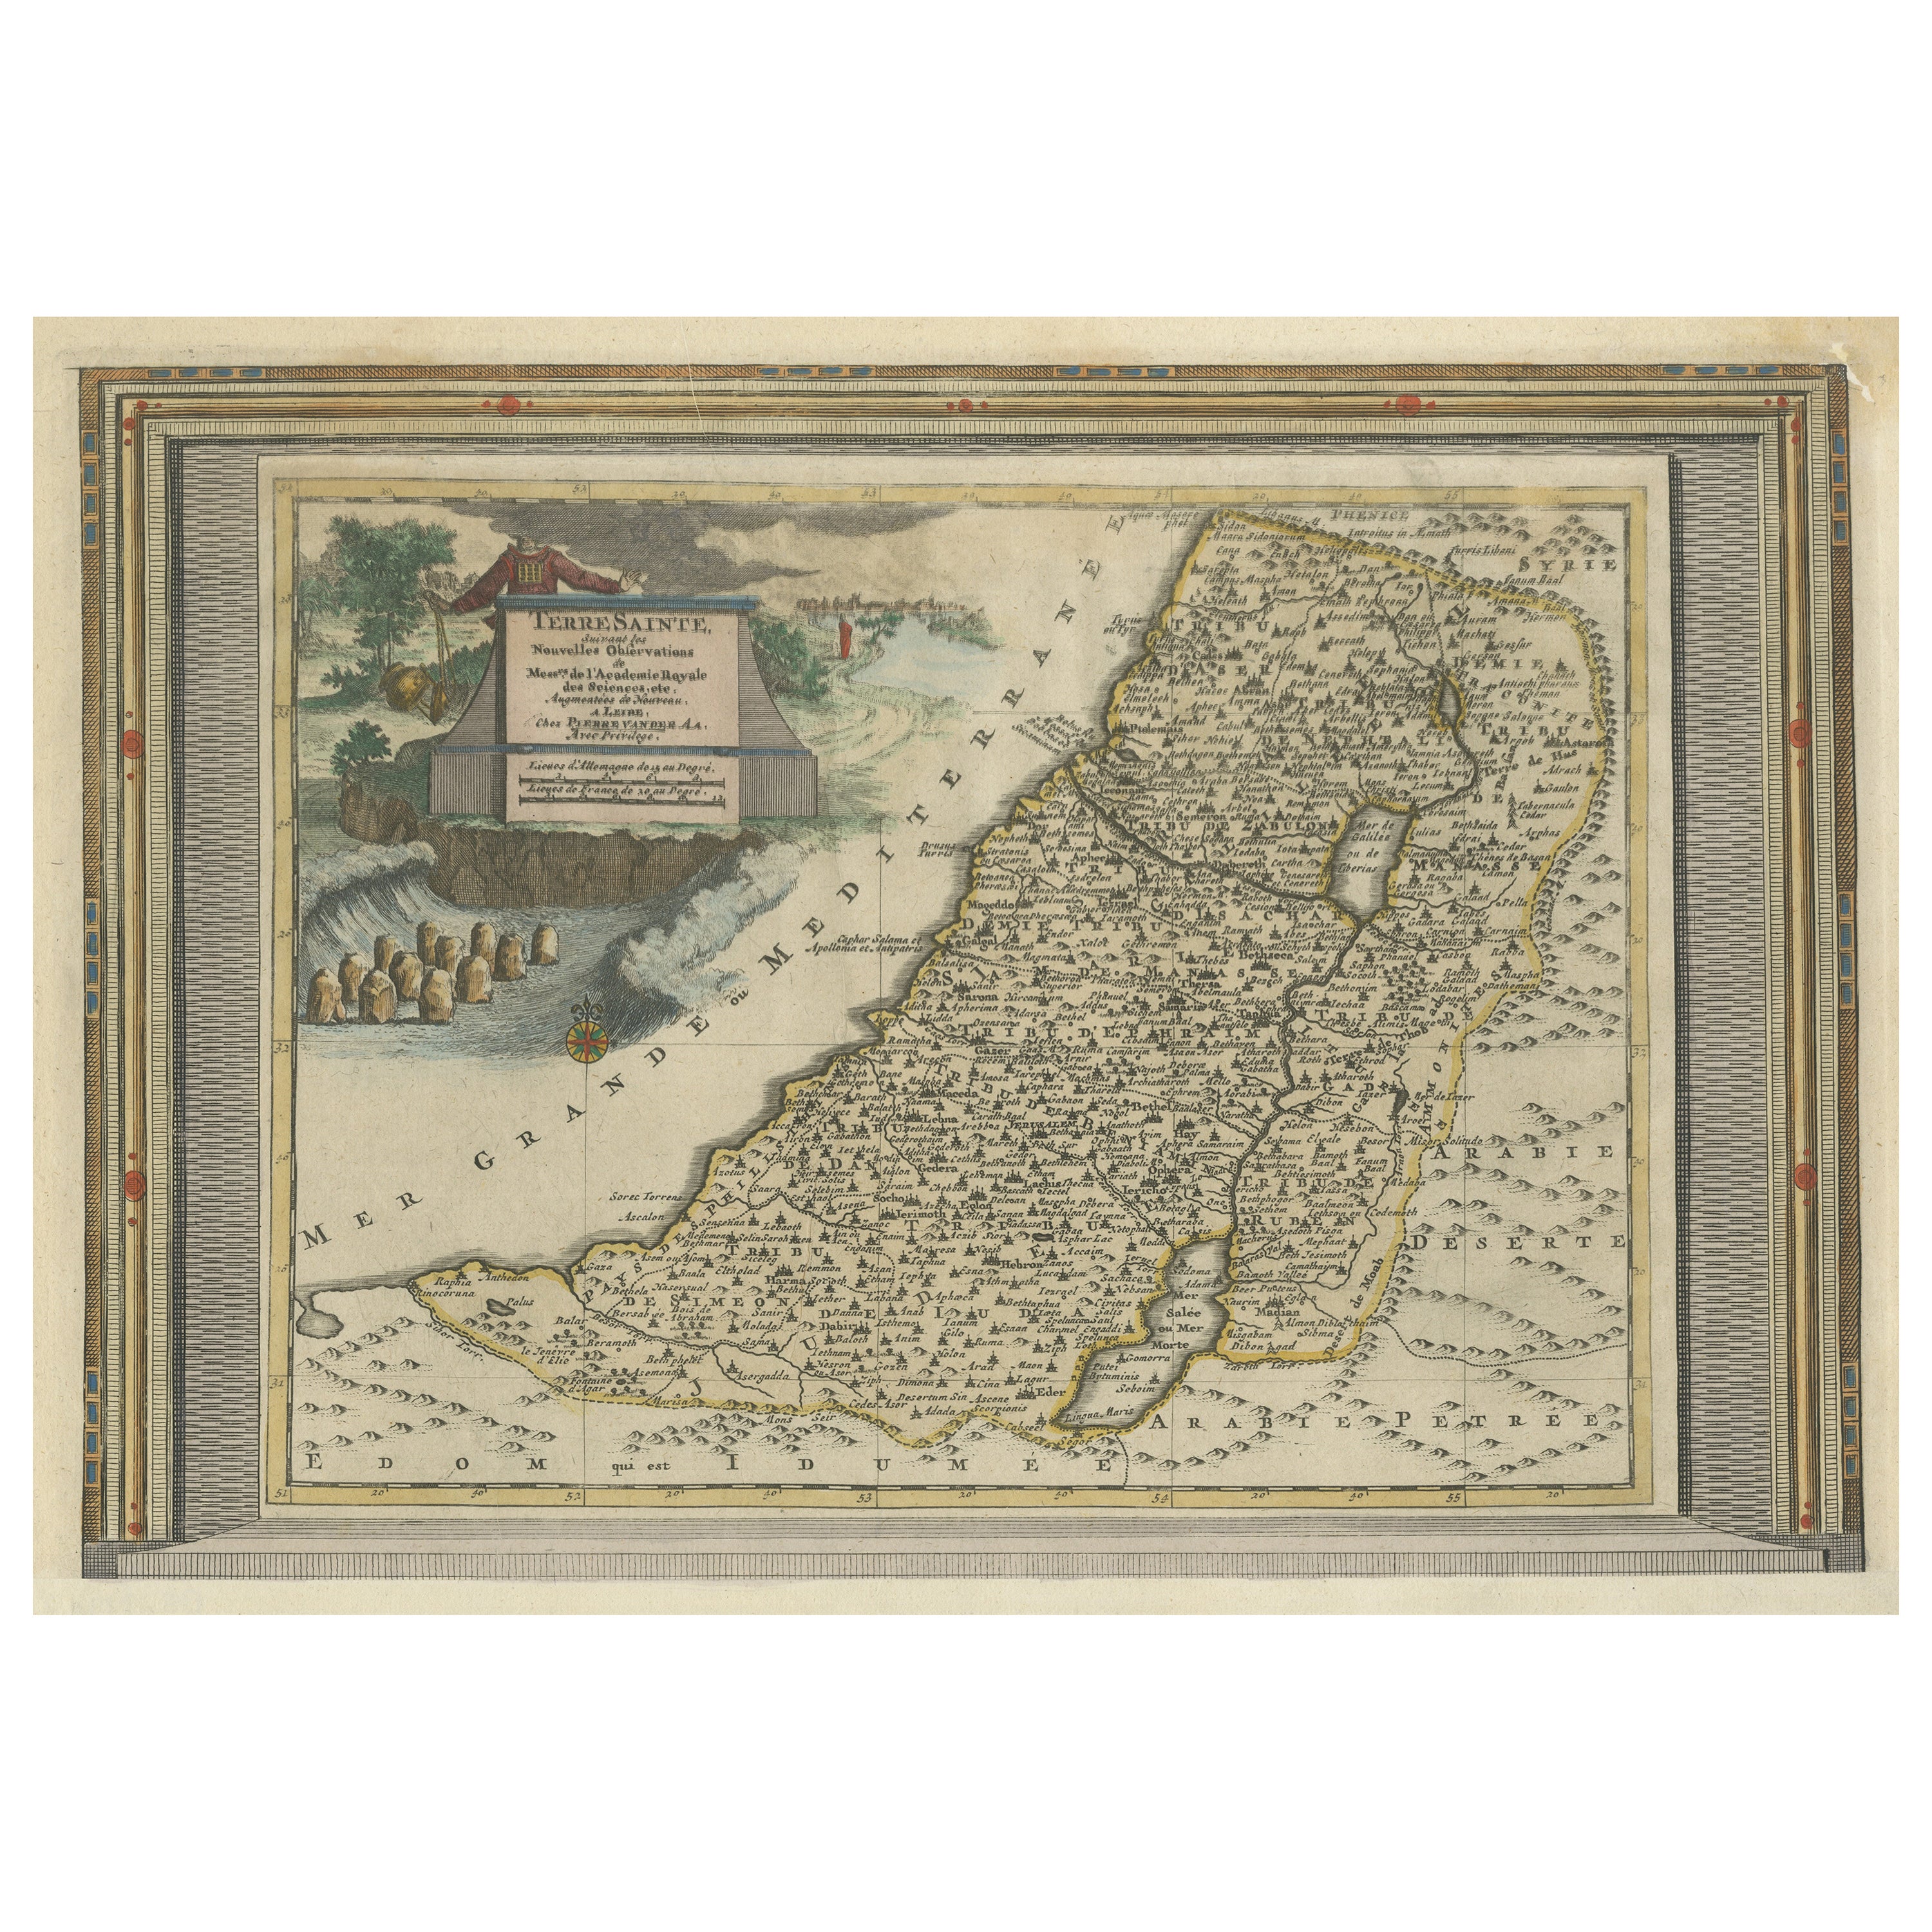 Antique Map of the Holy Land with Picture Frame Border